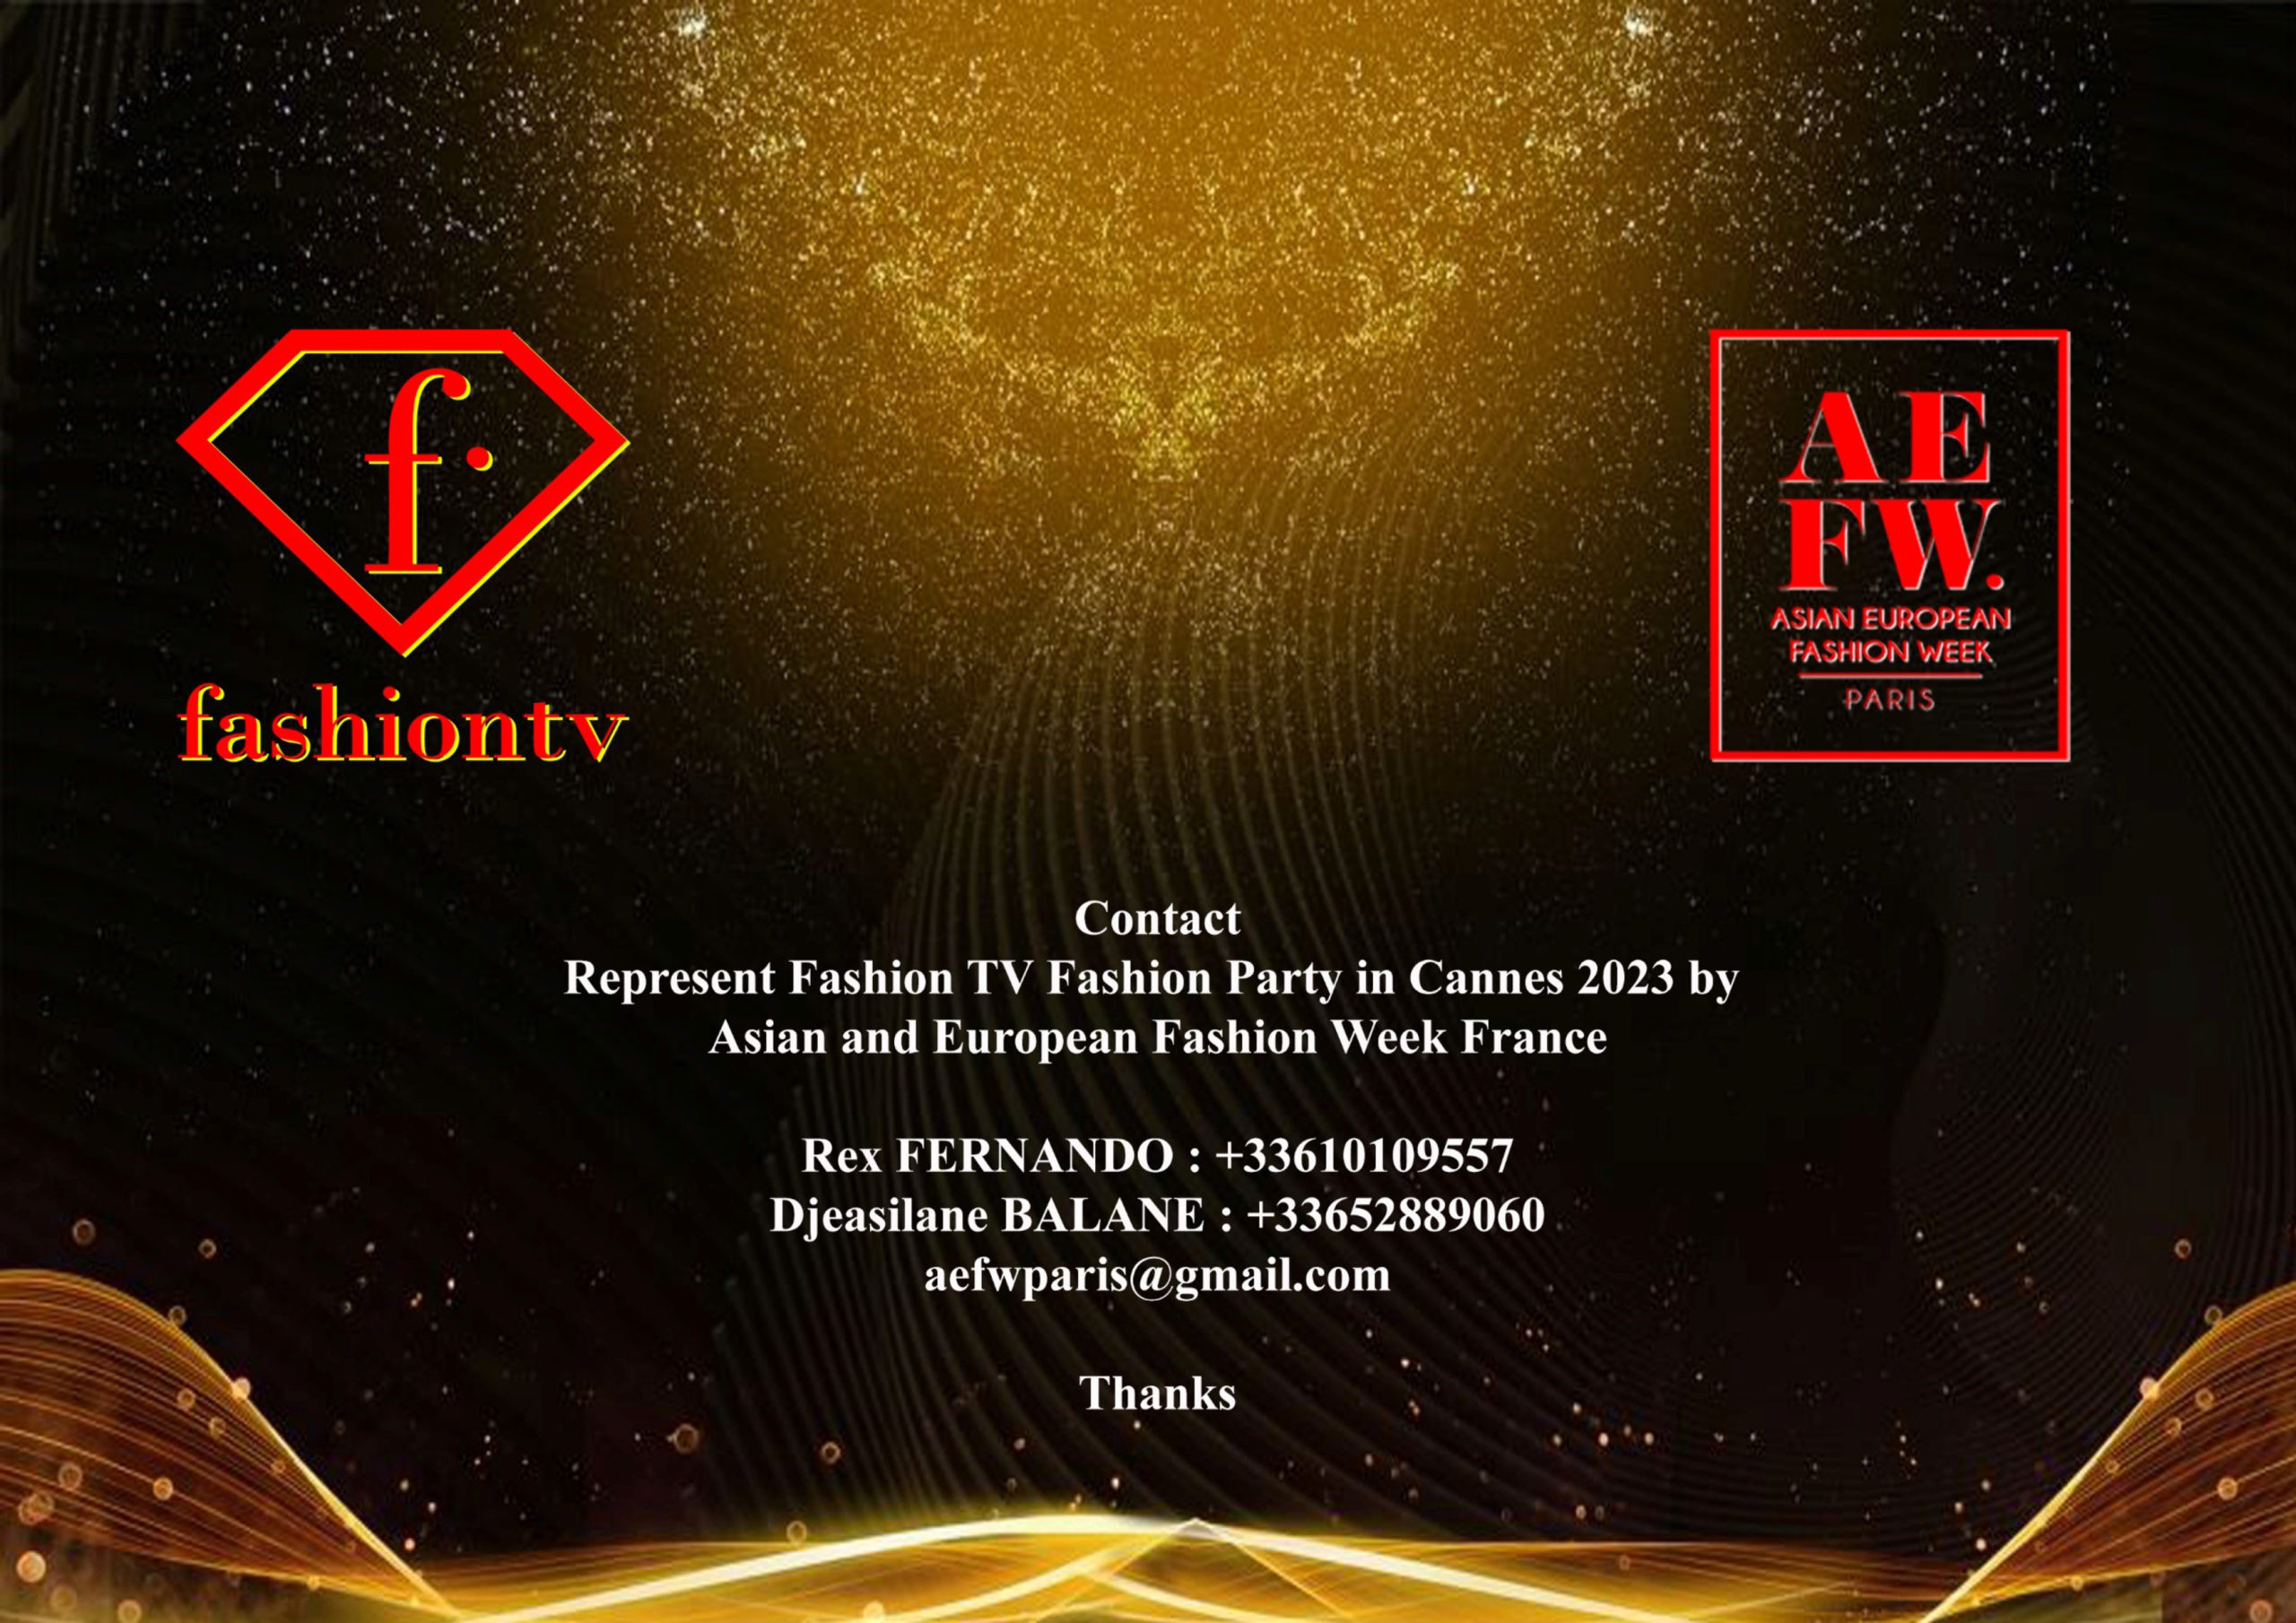 AFRICA VOGUE COVER - Designers Call-AEFW presents fashiontv OFFICIAL FASHION PARTY SHOW IN CANNES 76TH Edition of CANNES FESTIVAL -Contact -DN-AFRICA-DN-A-INTERNATIONAL-Media-Partner